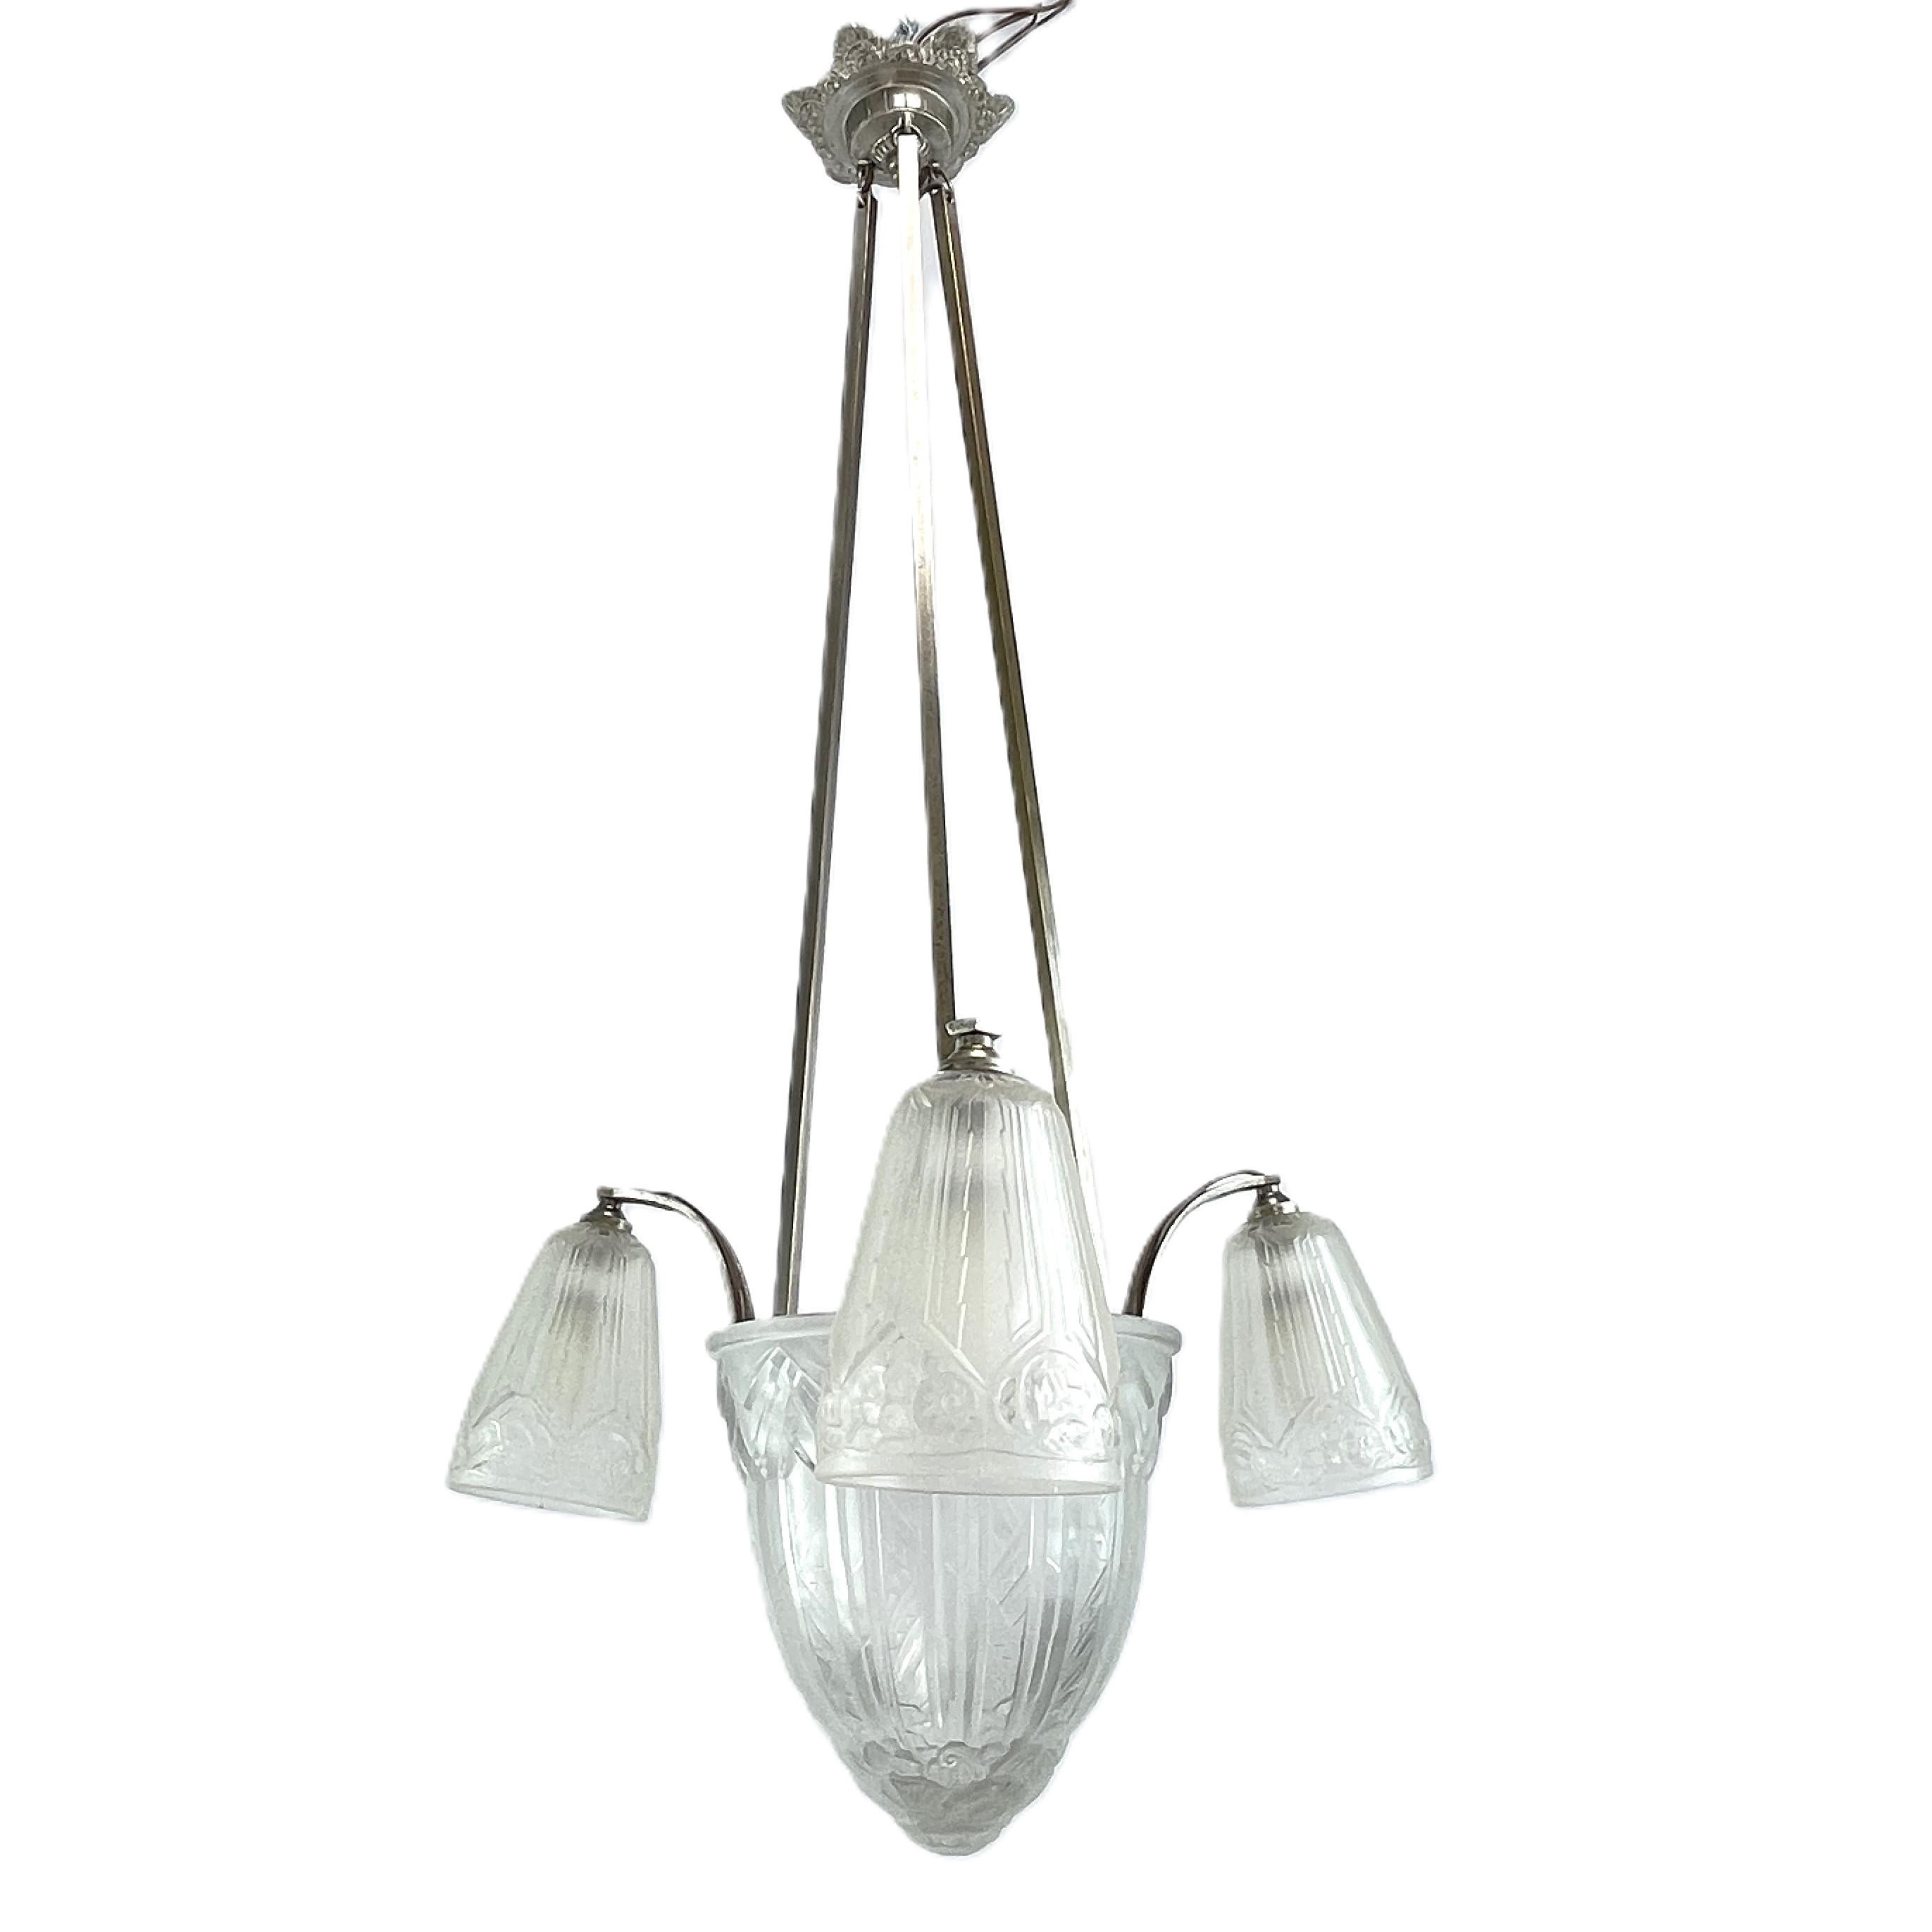 Art Deco Chandelier Hanging Lamp by Maynadier, 1930s For Sale 4